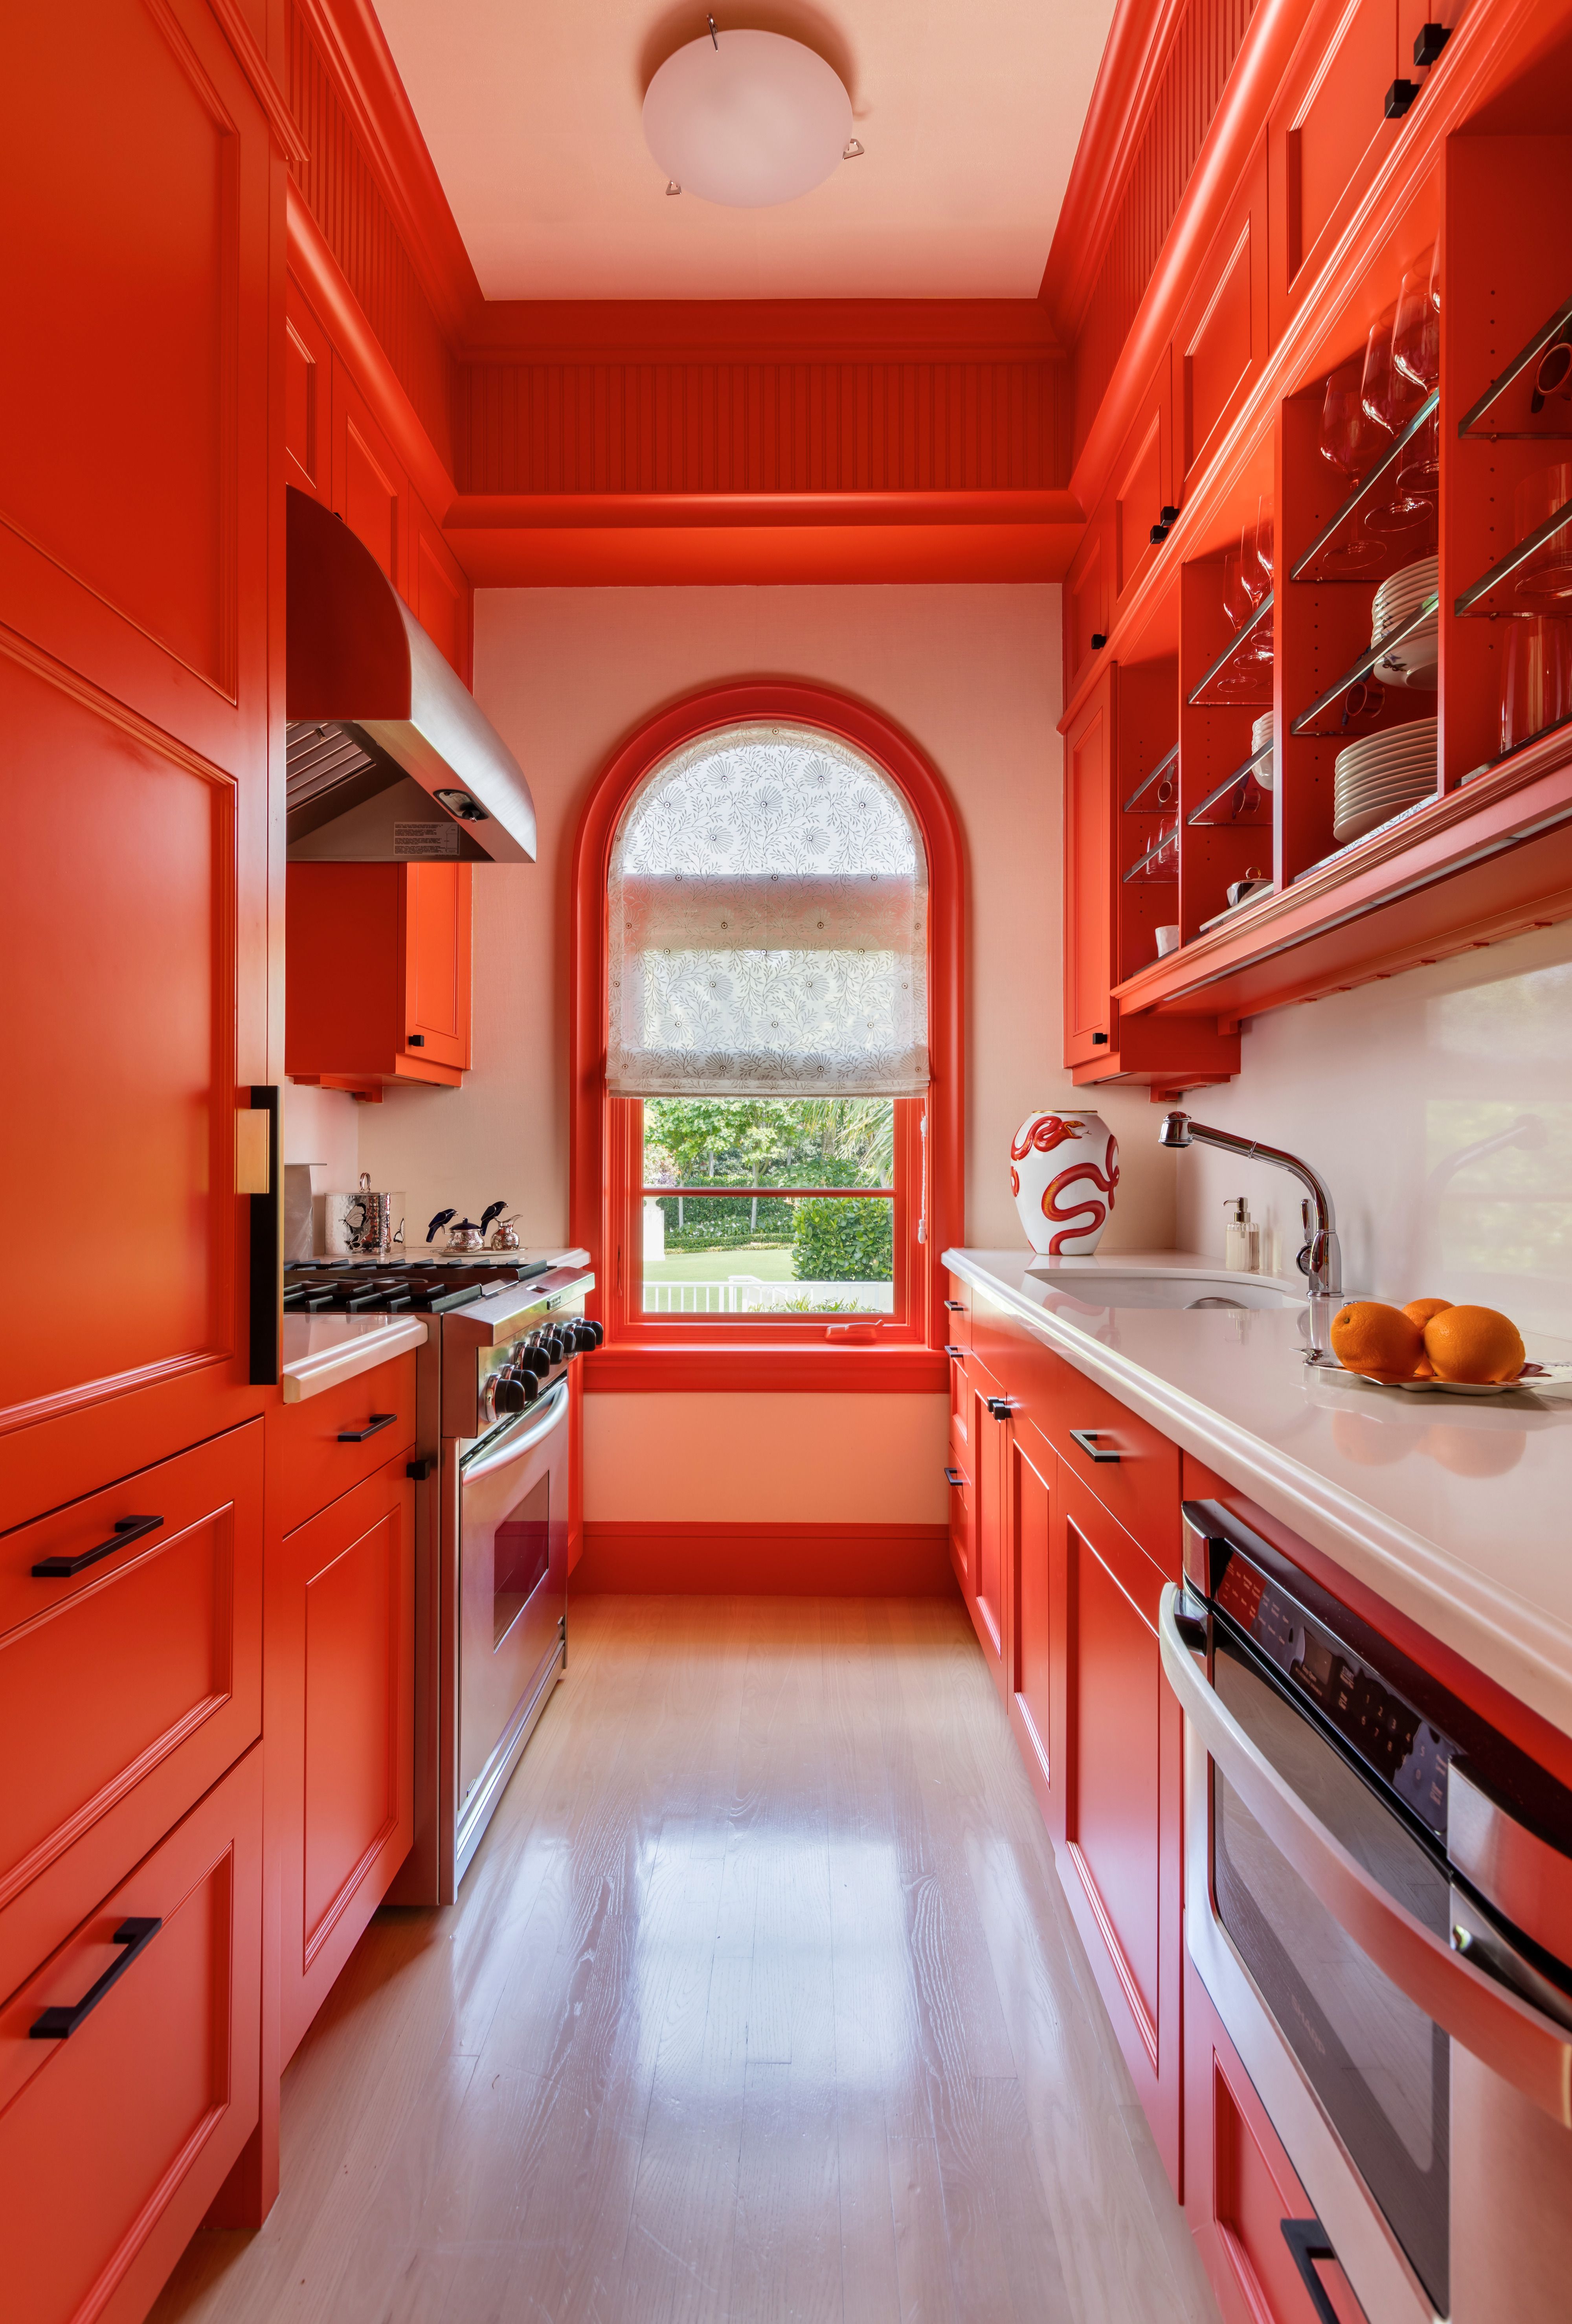 38 Colorful Kitchen Ideas to Liven Up Your Home